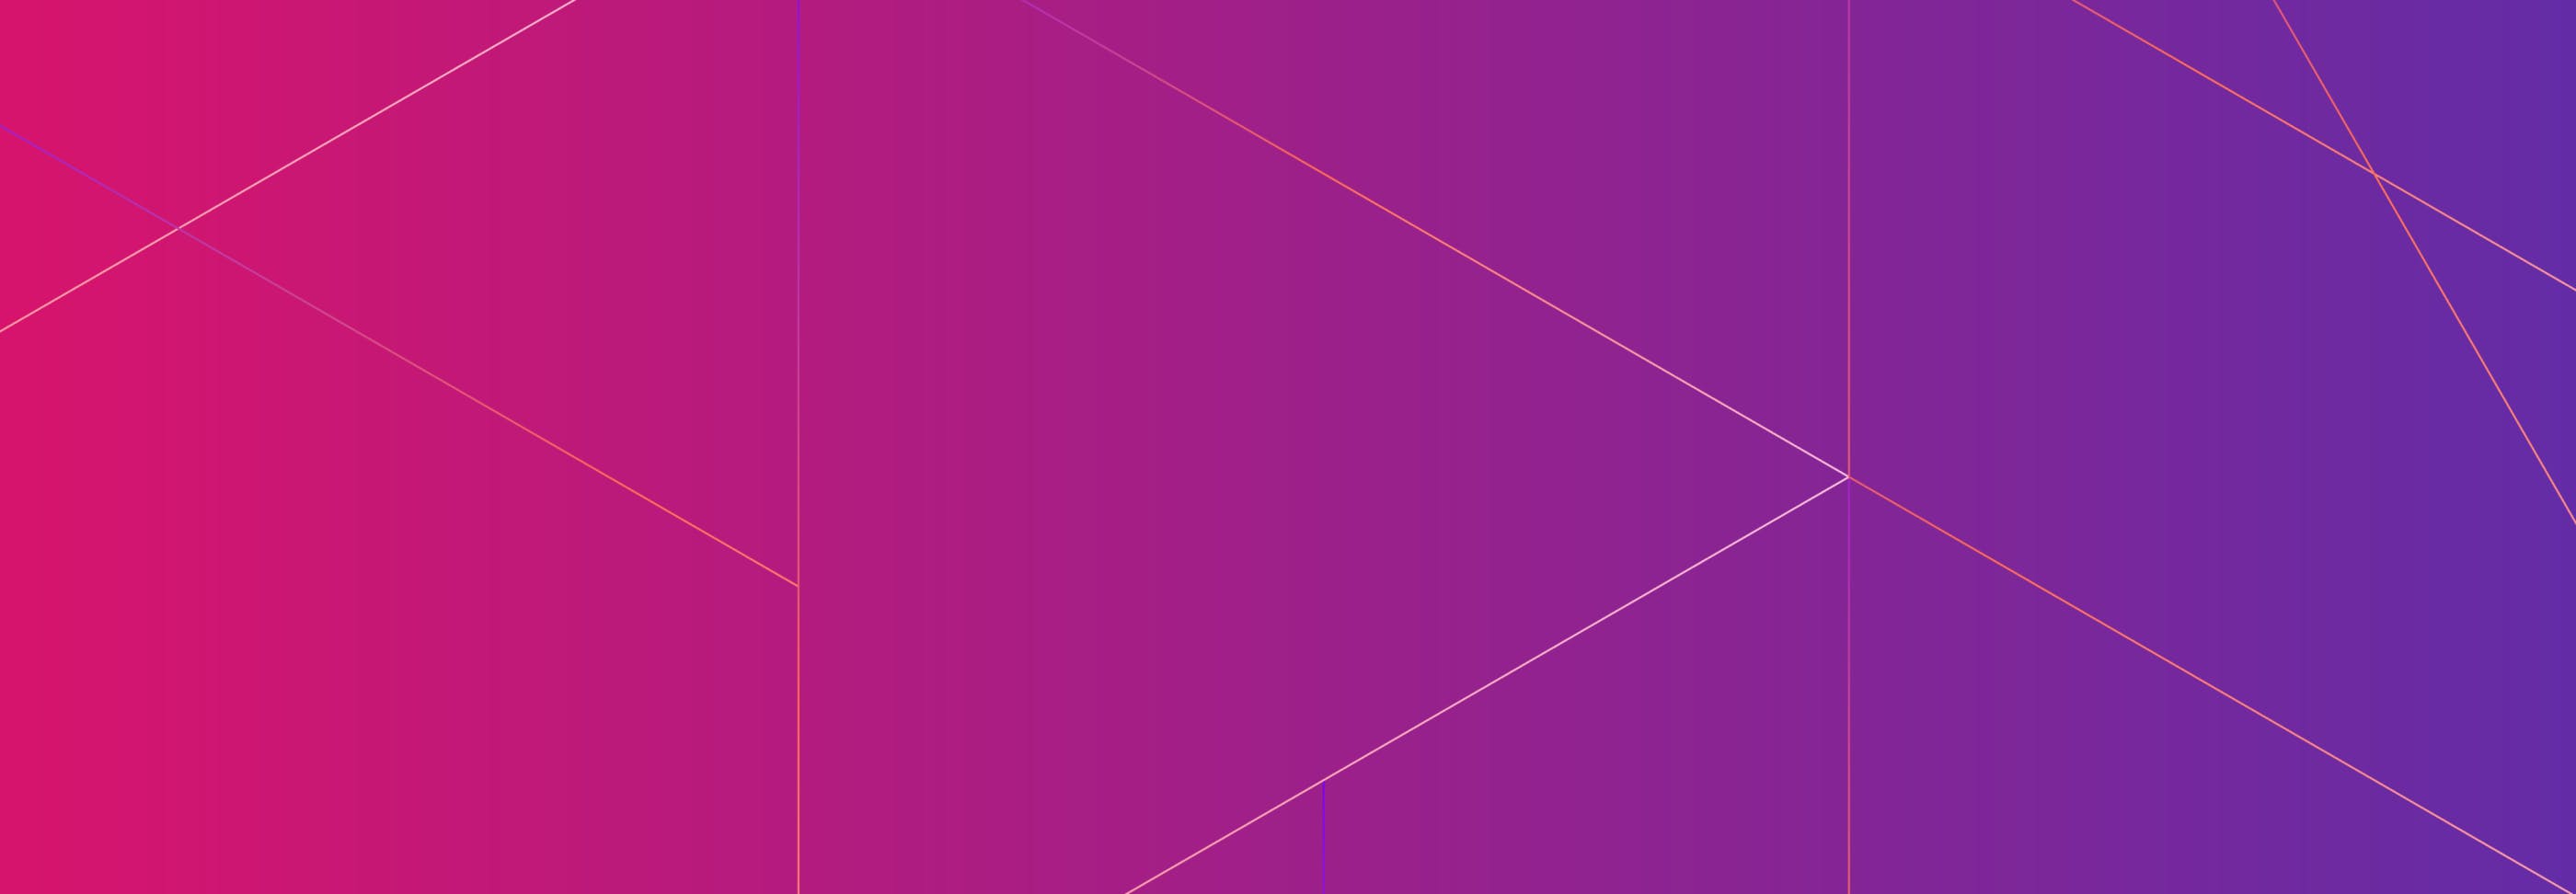 Datadog Announces Global Search and Analytics for Application Traces